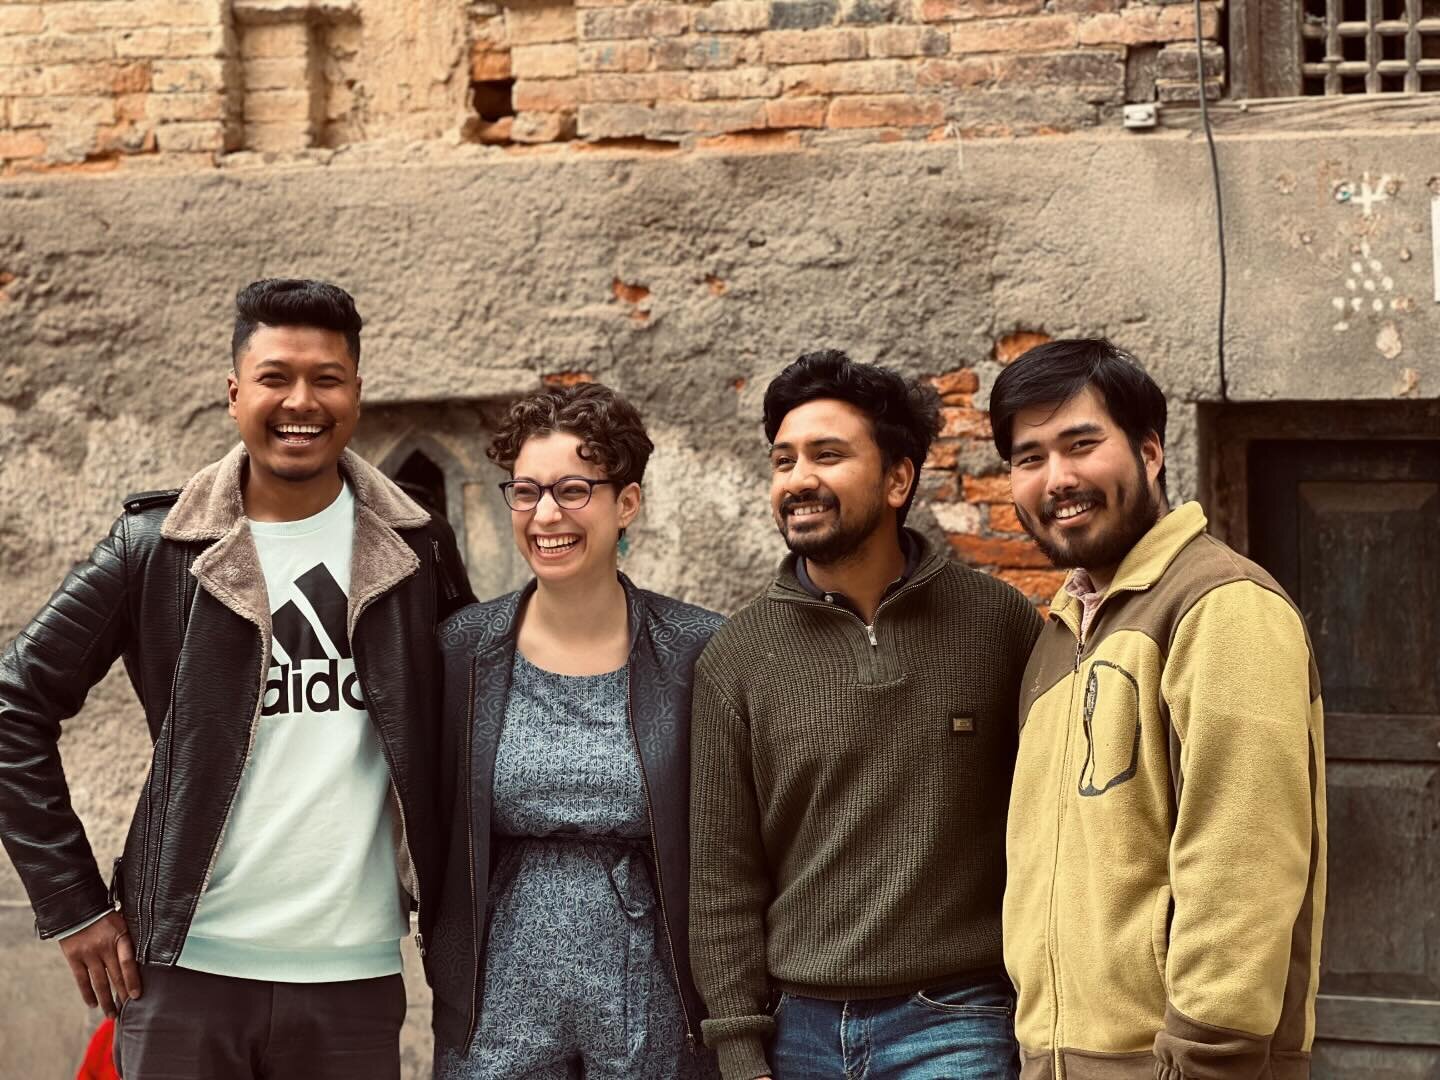 Just us snapping some group pictures after performing @echovalleyfest 

#himalayanhighway #echosinthevalley #echovalleyfest #nepalimusician #nepalifolkmusic #bluegrass #nepal